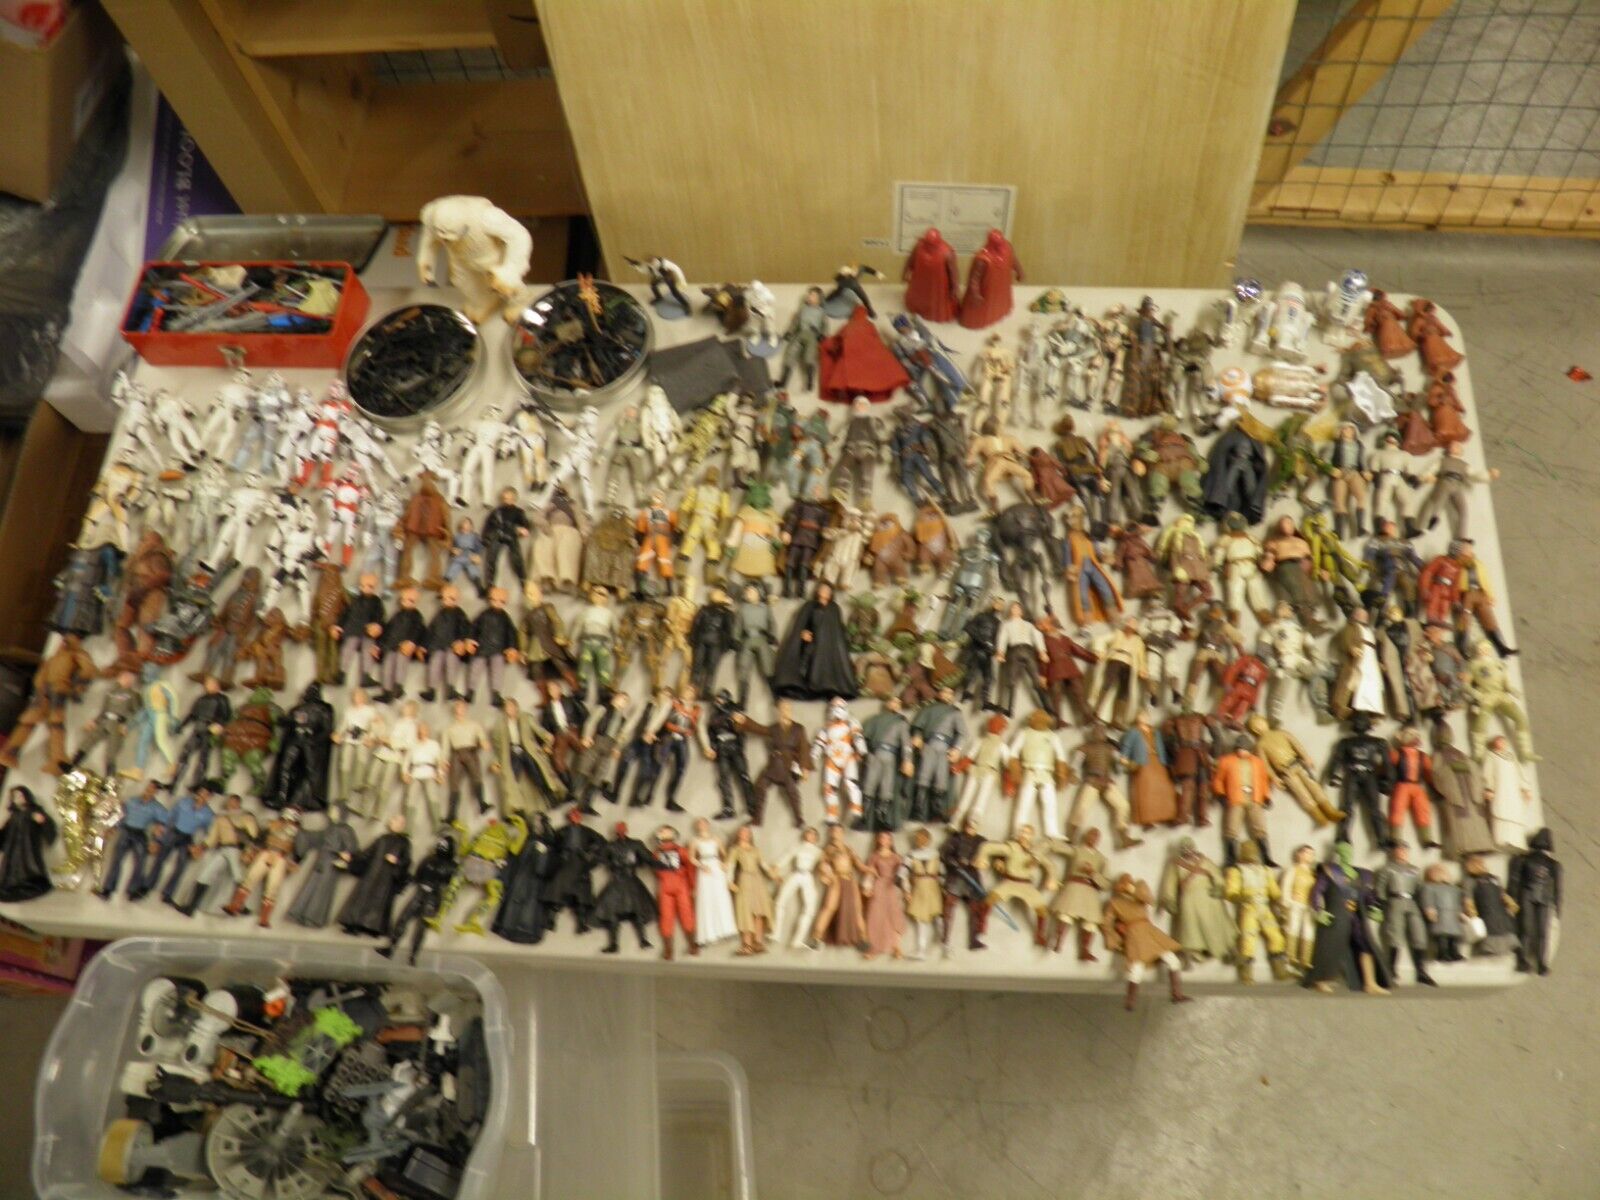 Huge Star Wars Lot Vintage To Modern Action Figures, Weapons, Accessories, 500+